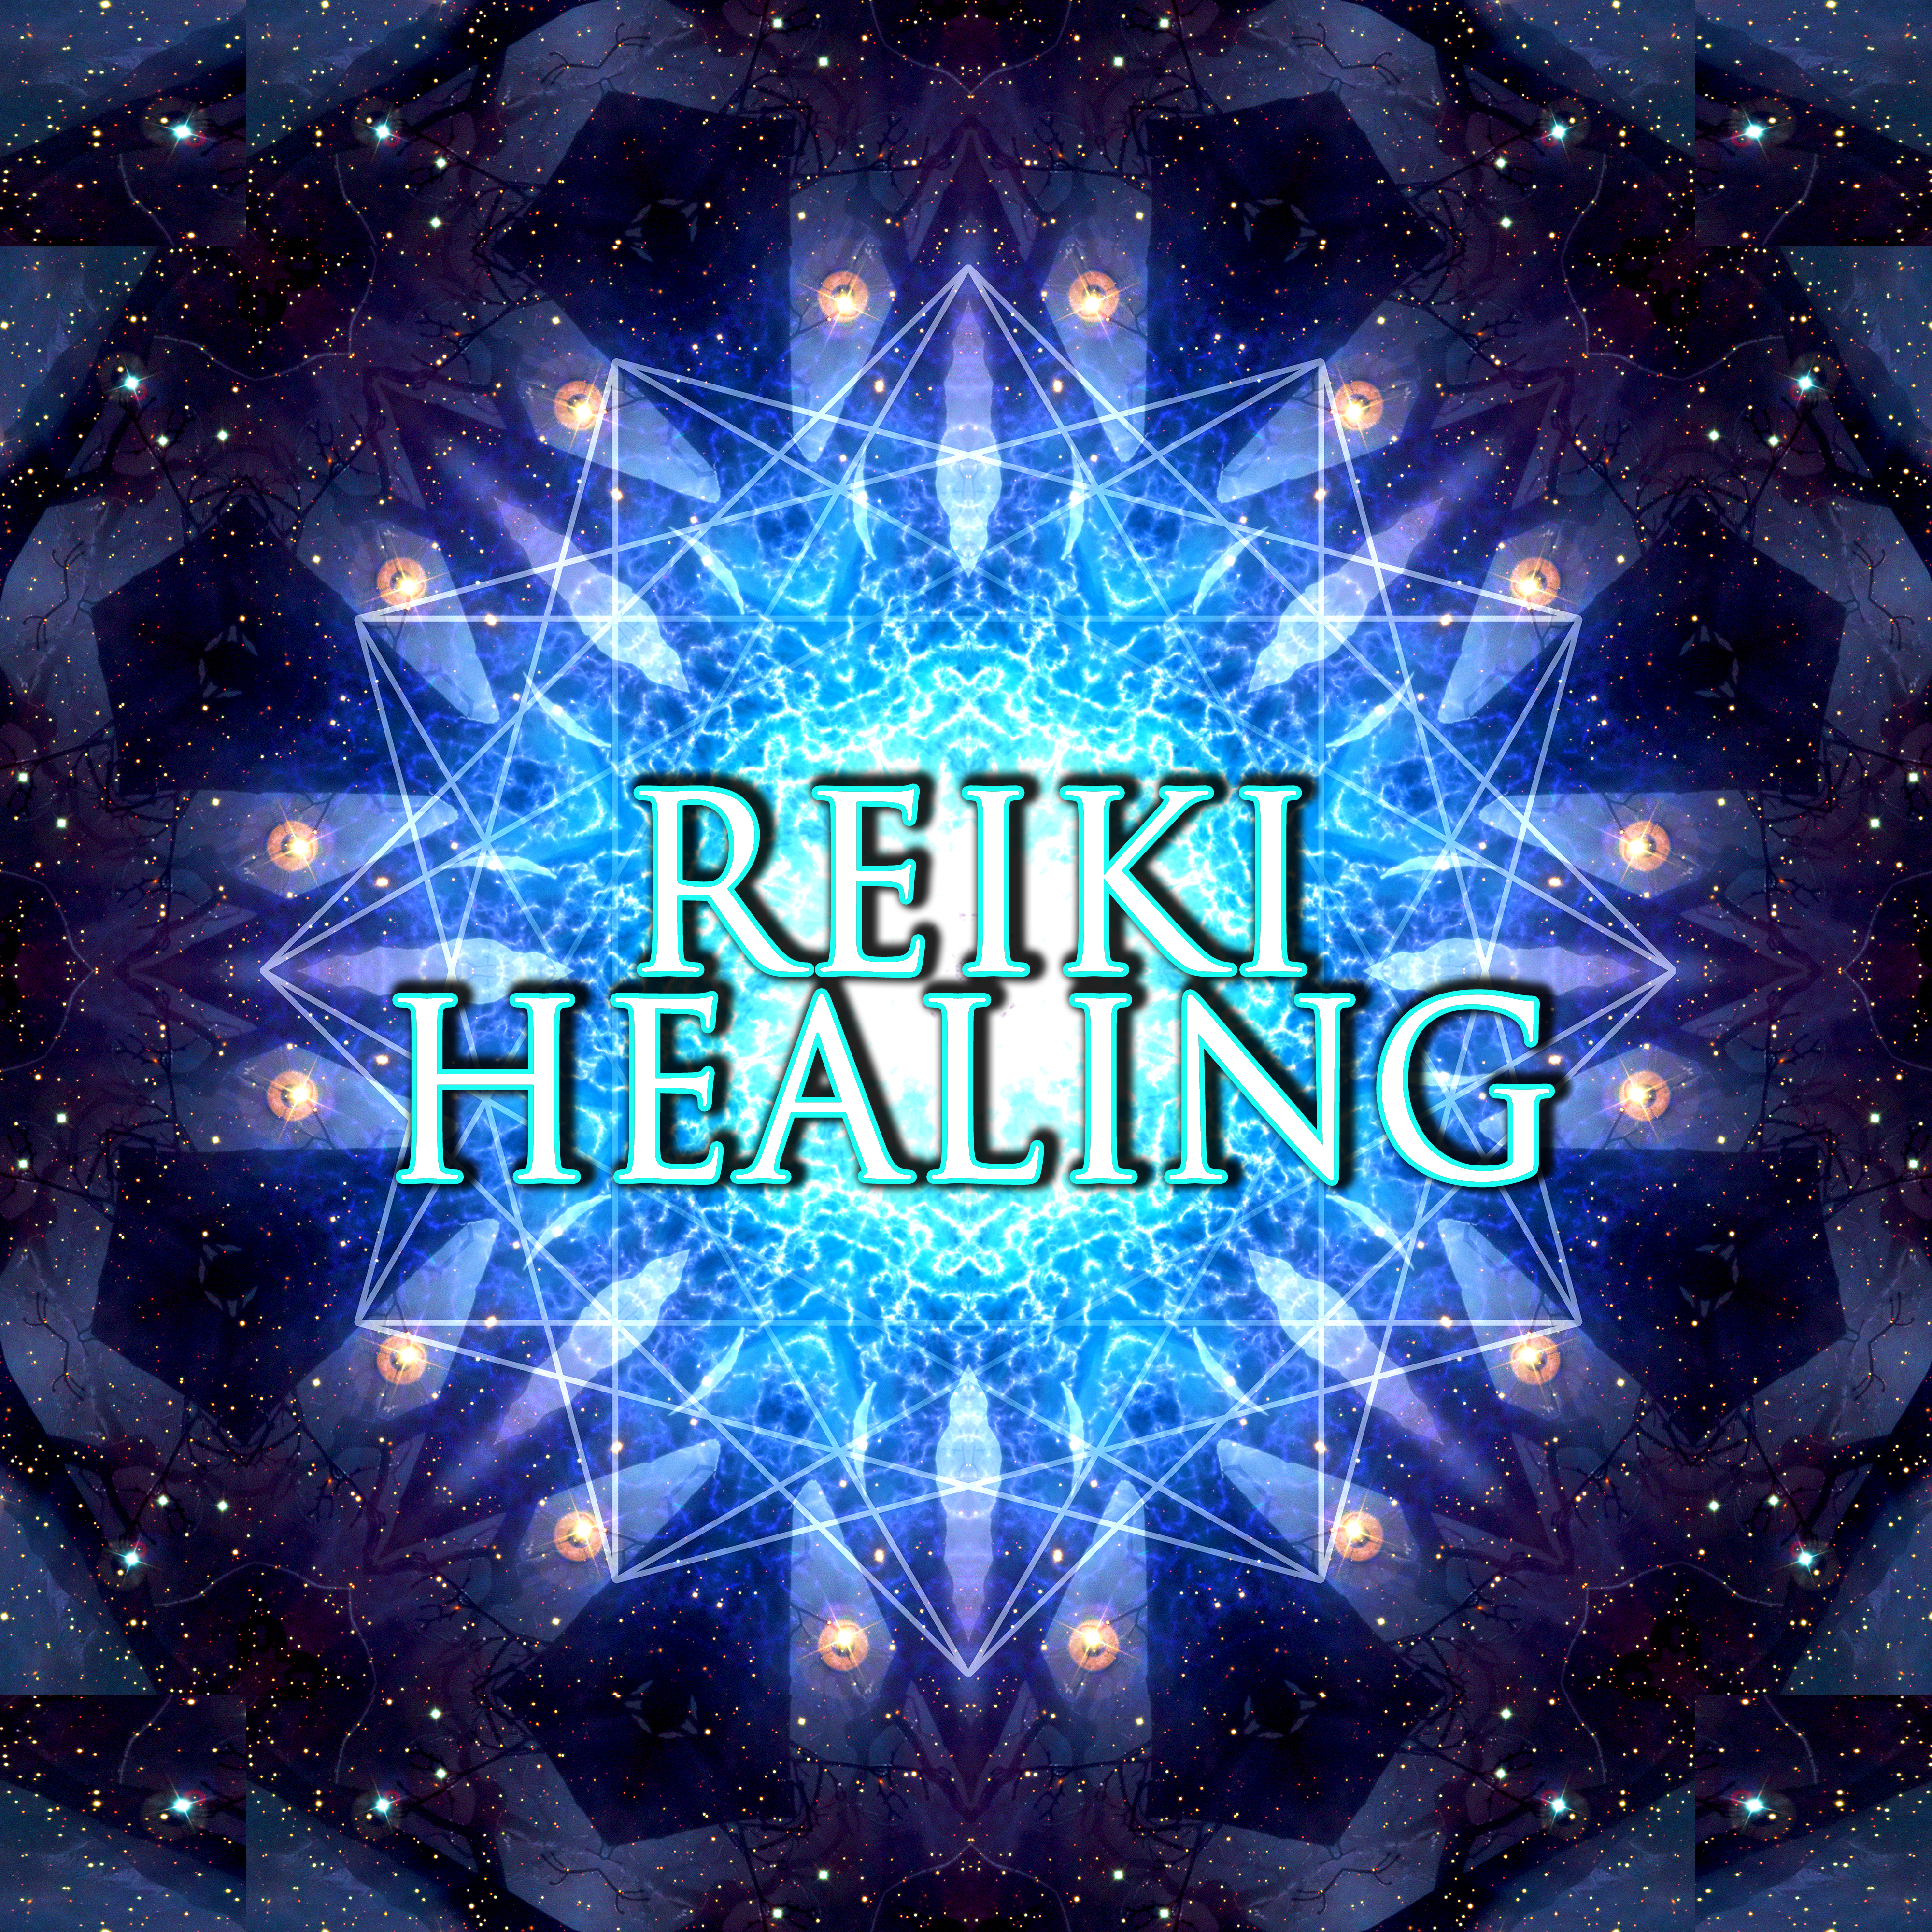 Reiki Healing – Sounds of Nature for Massage, Relaxing Music, Relaxation, Wellness, Natural White Noise, Reflexology, Physical Therapy